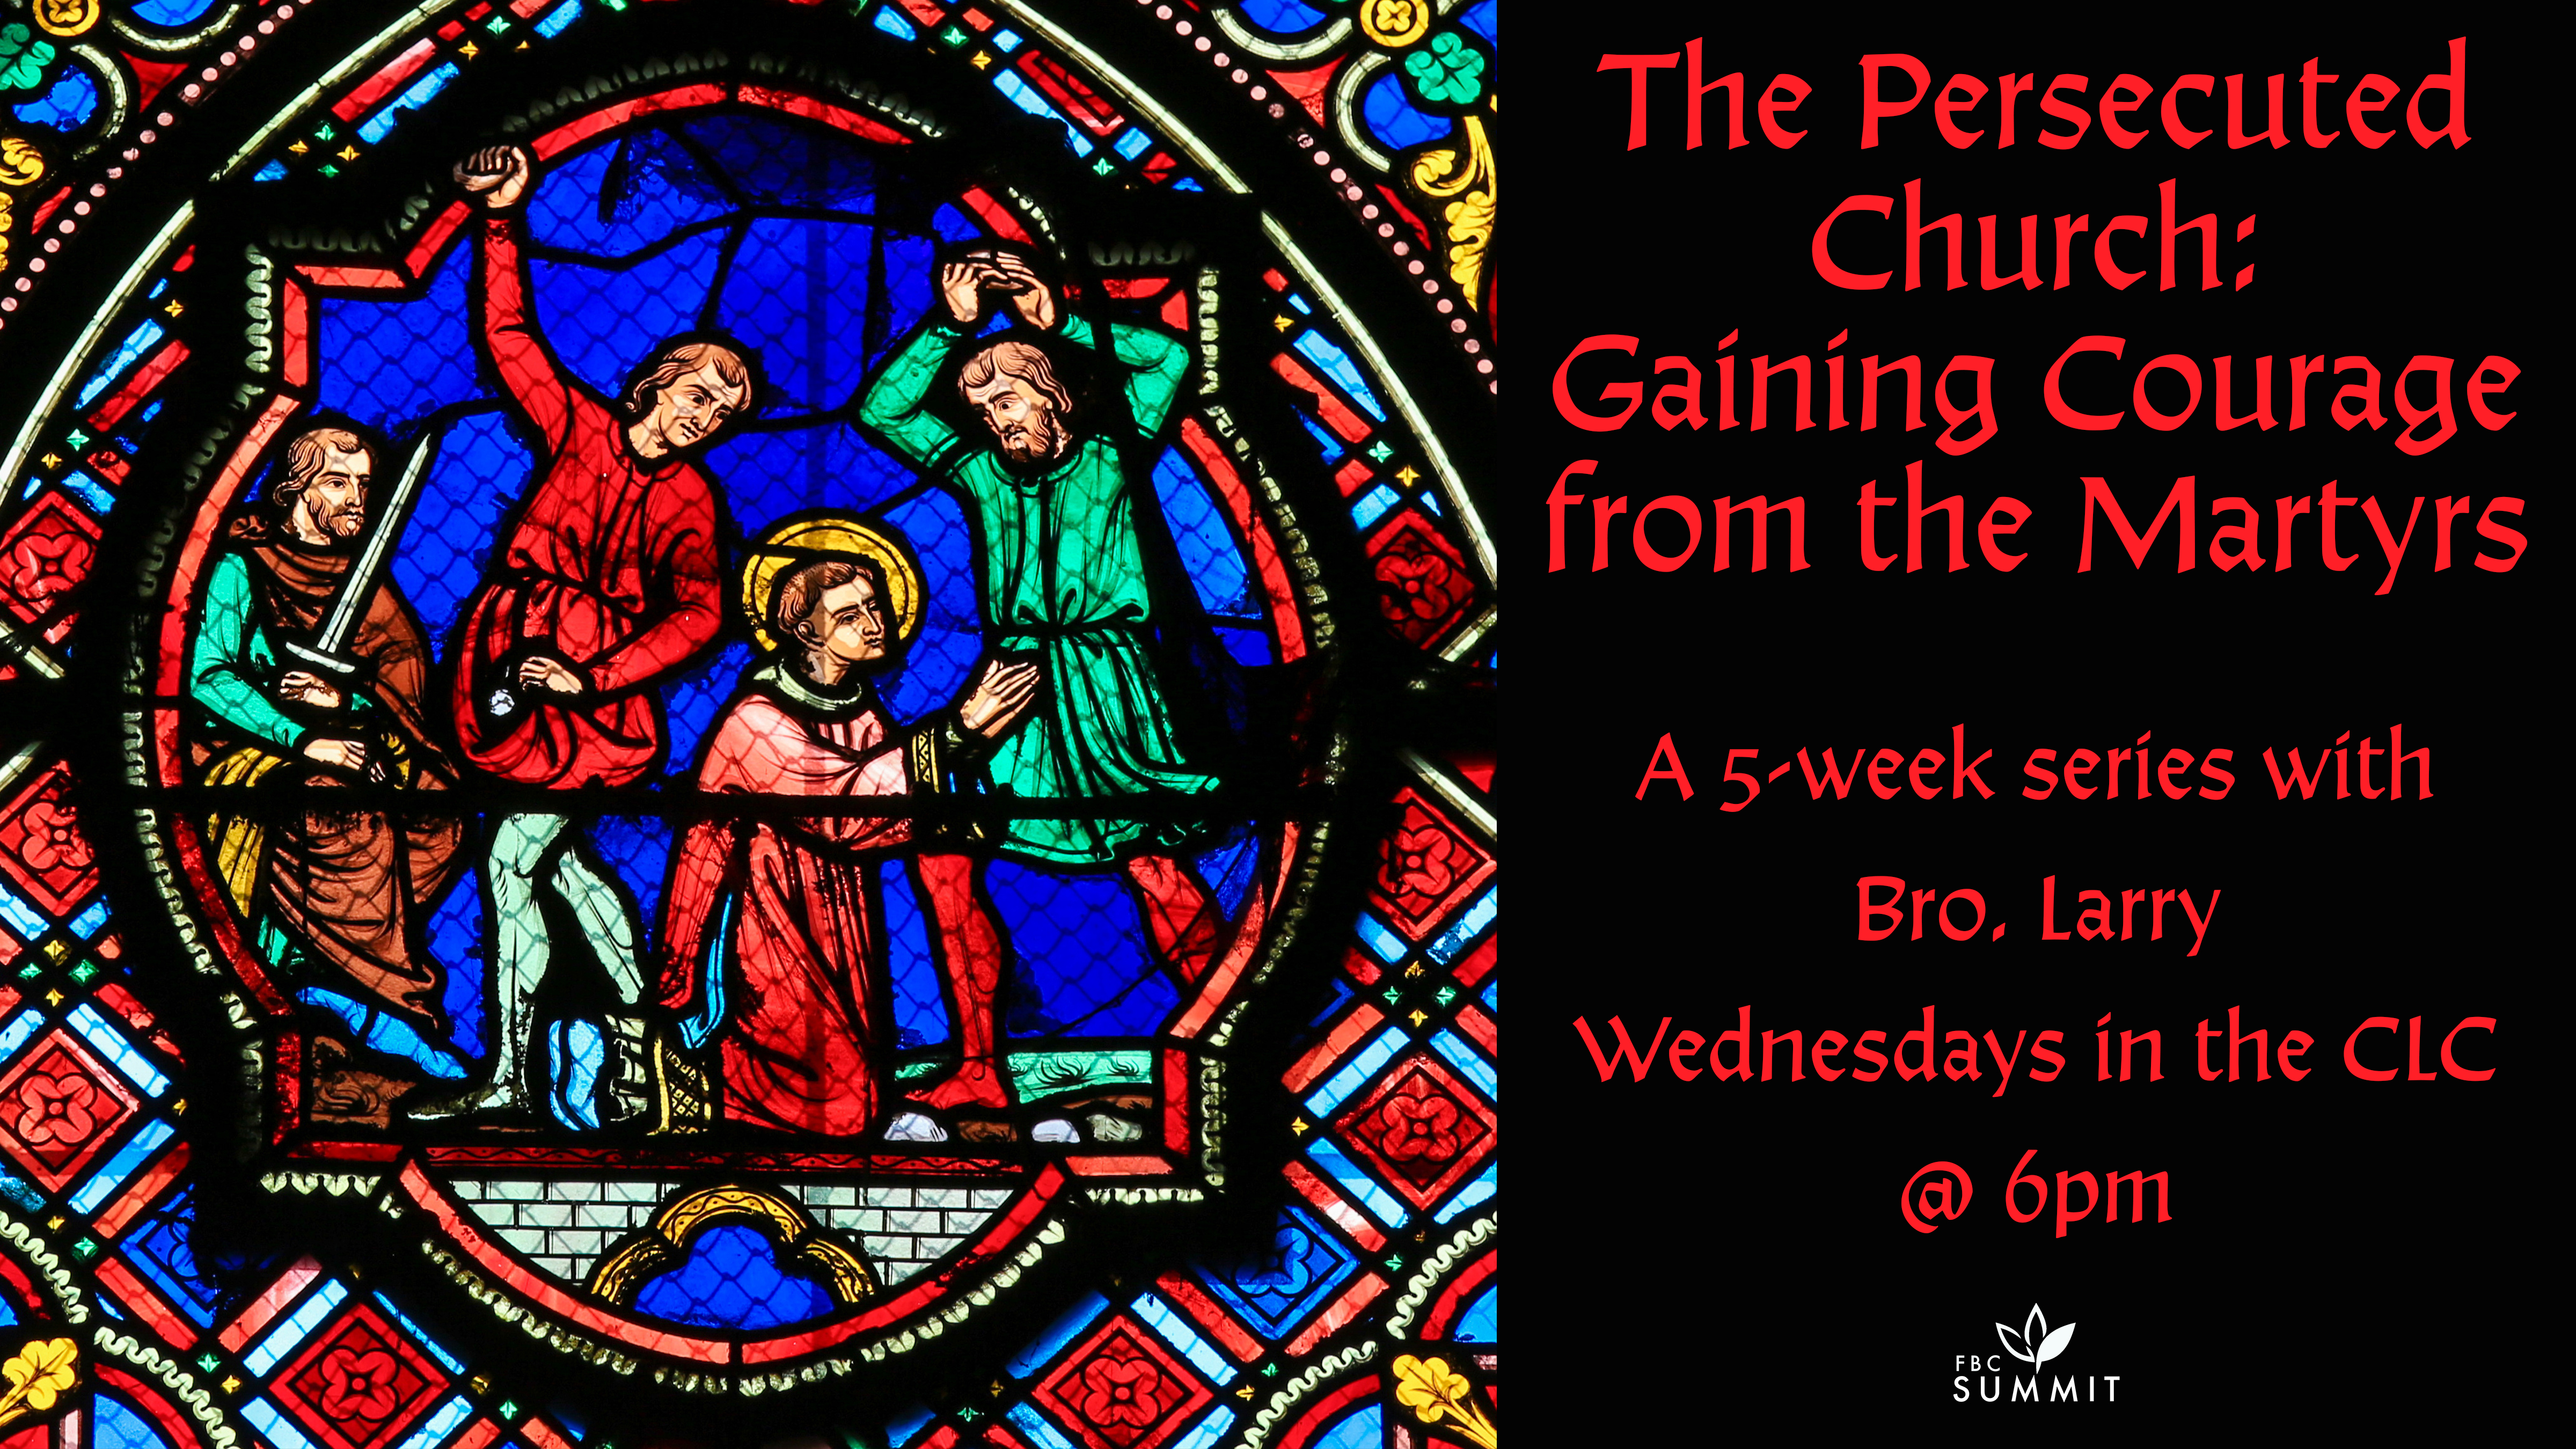 Wednesday Bible Study: "The Persecuted Church: Gathering Courage from the Martyrs, Part II" // Dr. Larry LeBlanc